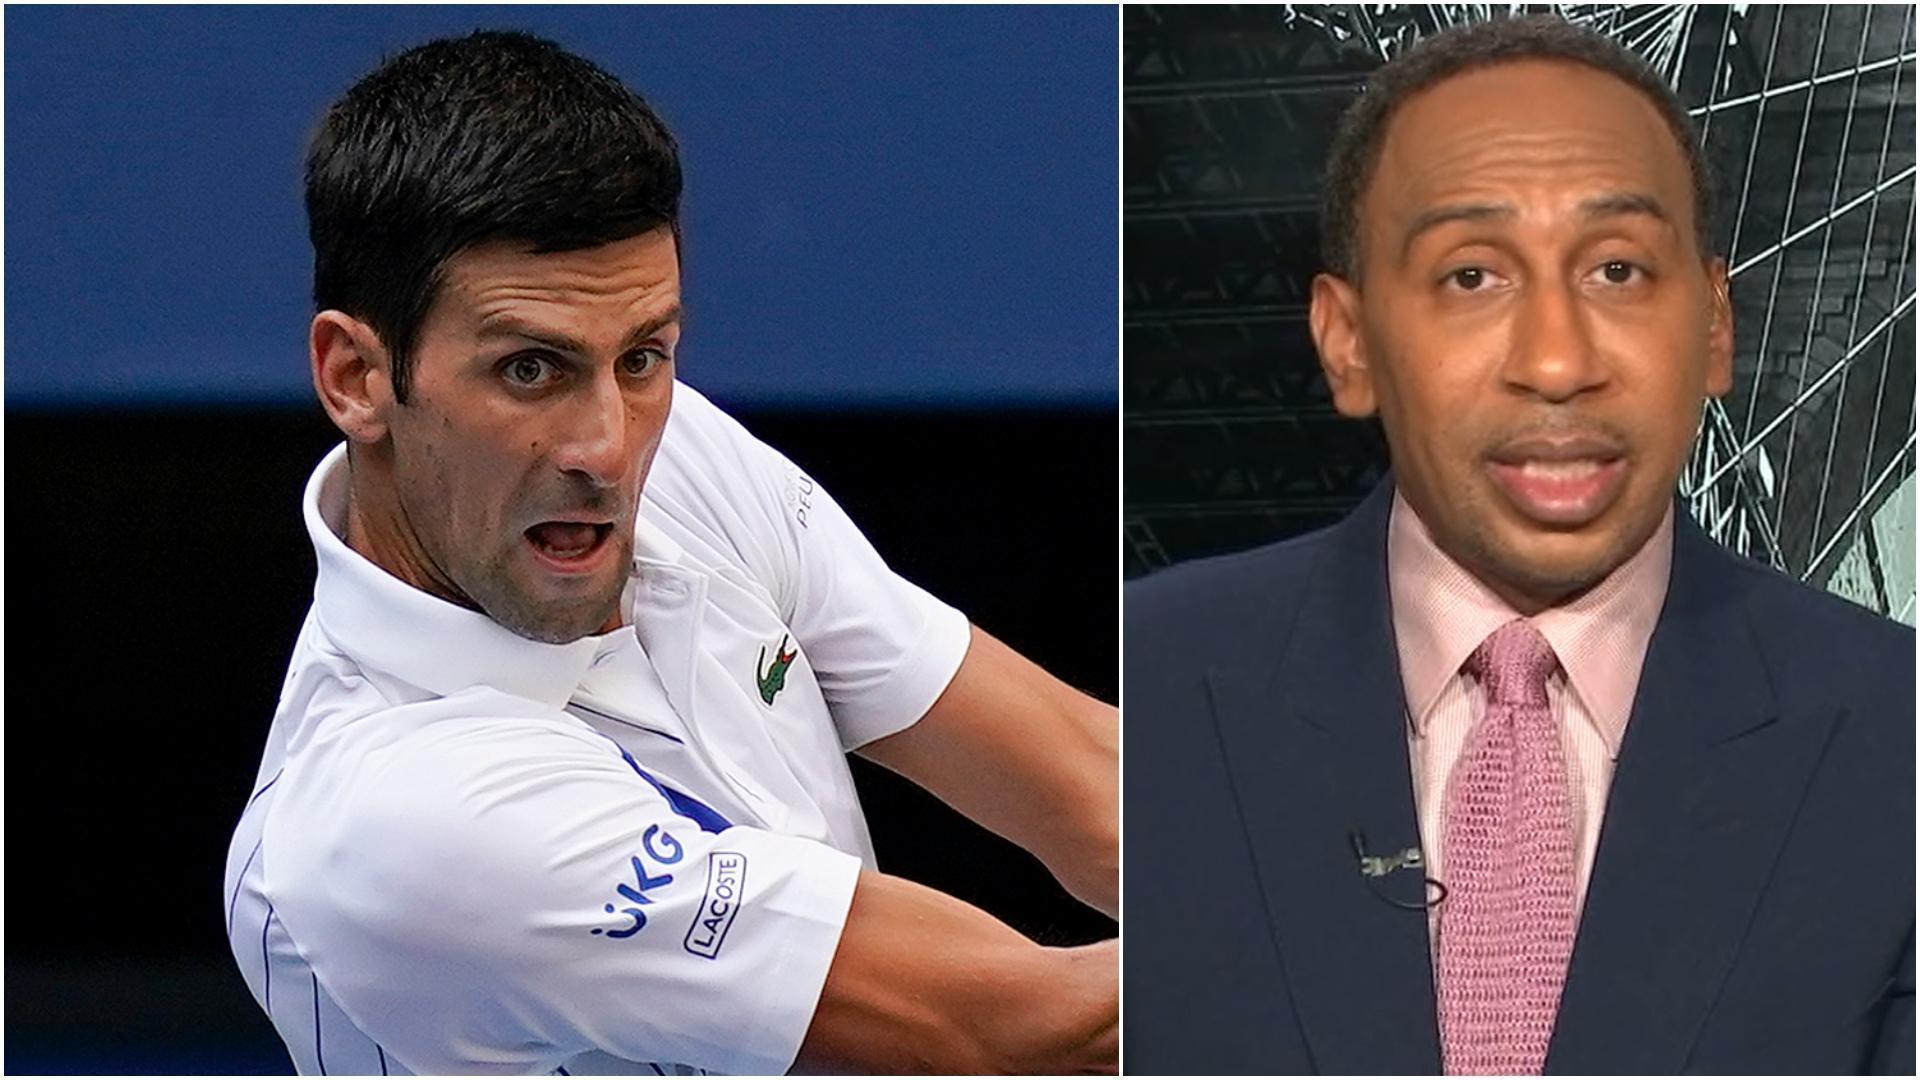 Stephen A. disgusted by Djokovic's disqualification